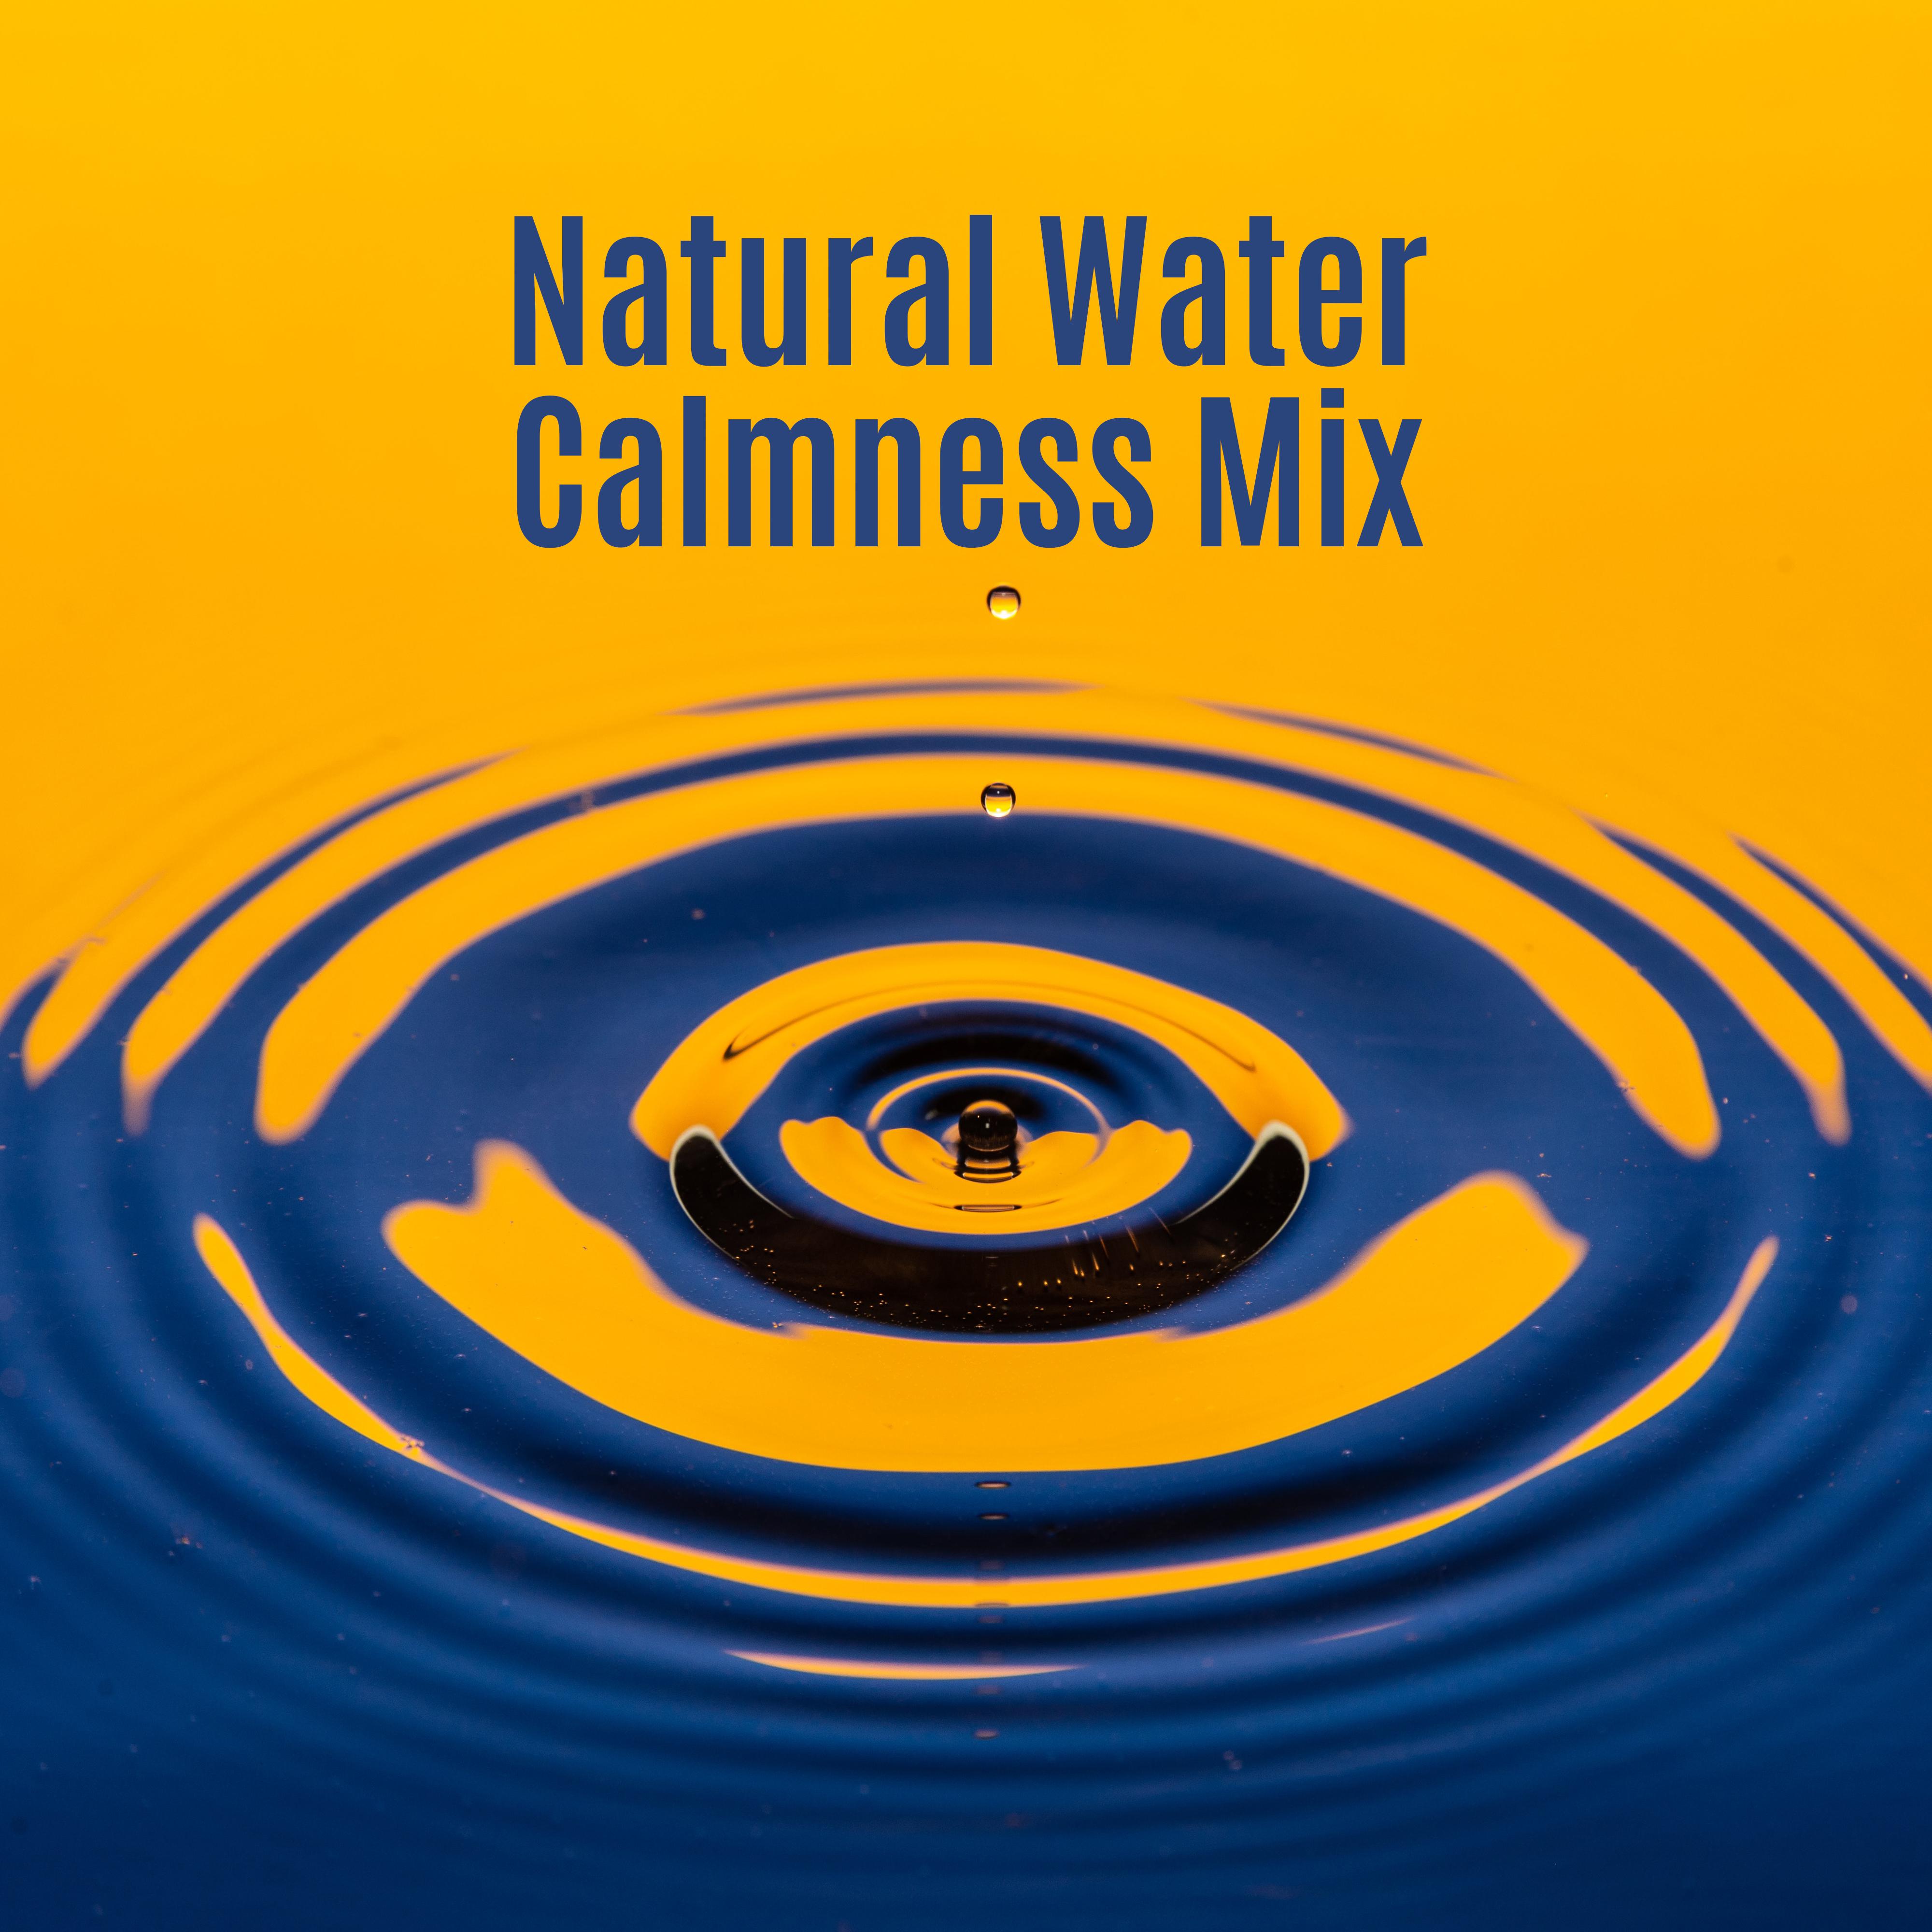 Natural Water Calmness Mix: 2019 New Age Soothing Music for Full Calm & Rest, Relaxation & Good Sleep, Beautiful Sounds of Water with Delicate Piano Melodies